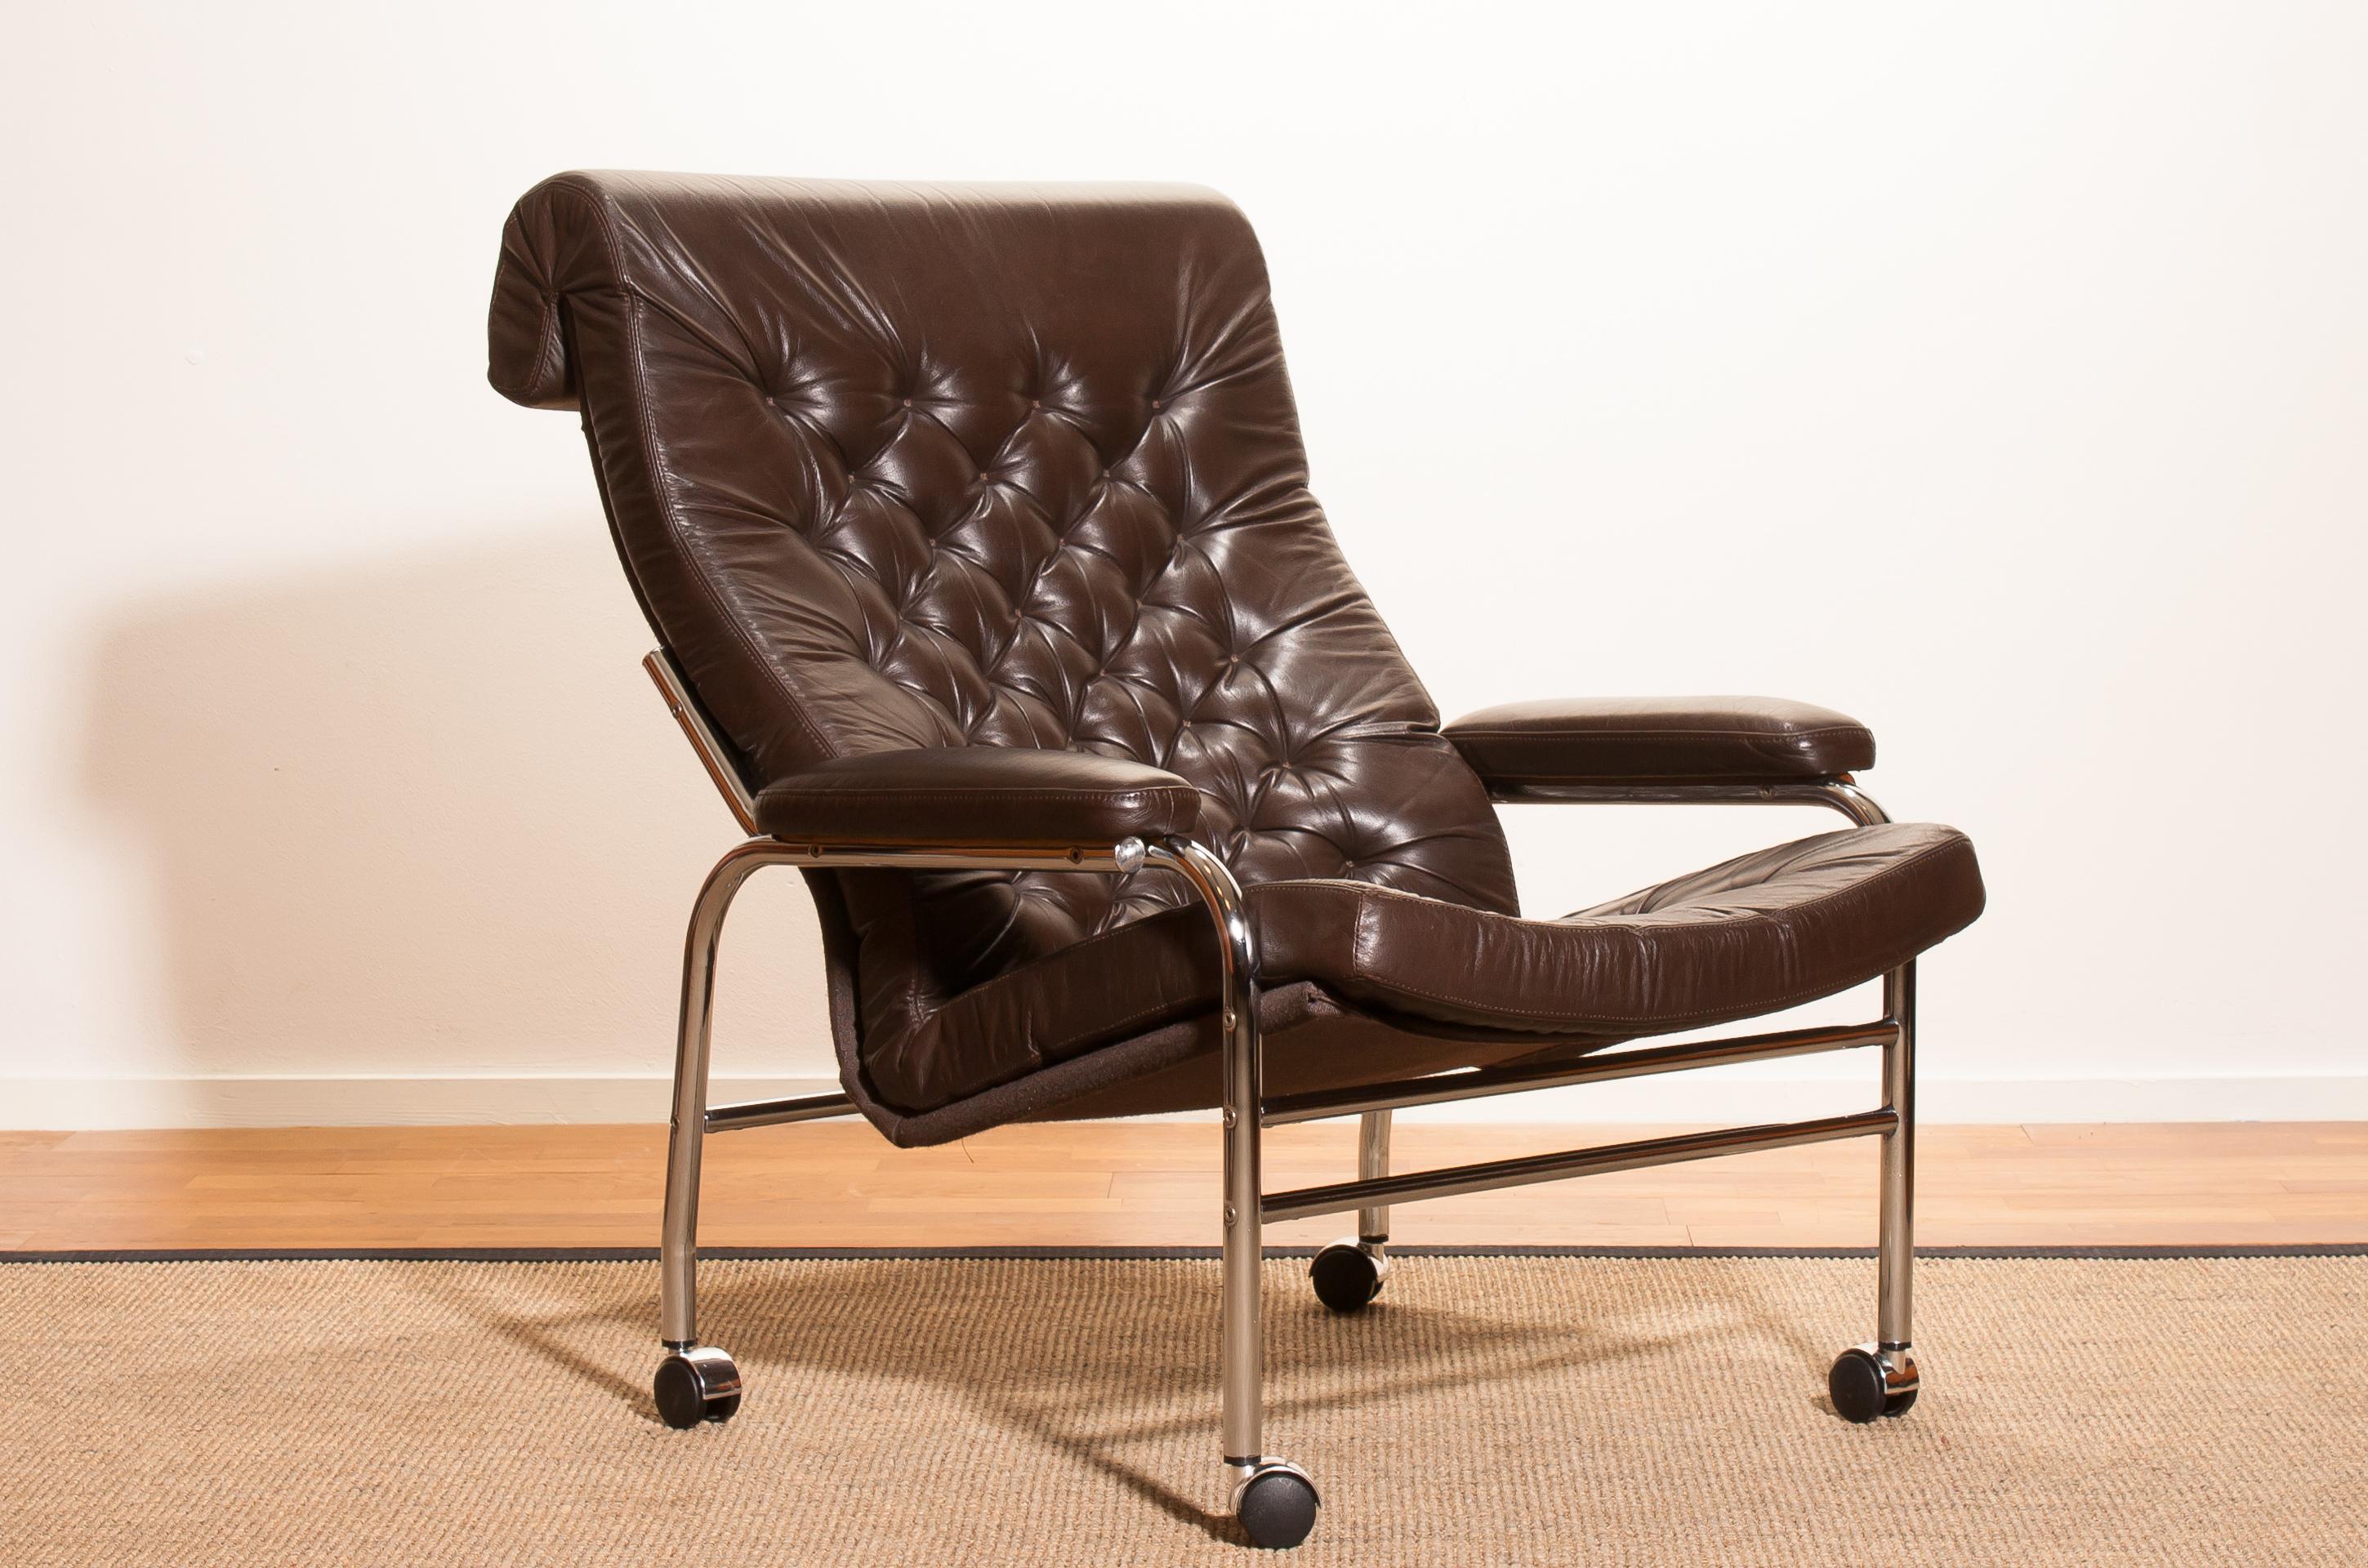 Beautiful and rare lounge chair designed by Noboru Nakamura, Sweden.
This chair has a dark brown leather seating on a chromed tubular wheeled frame.
It is in a mint condition,
circa 1970s
Dimensions: H 90 cm, W 78 cm, D 93 cm, SH 40 cm.